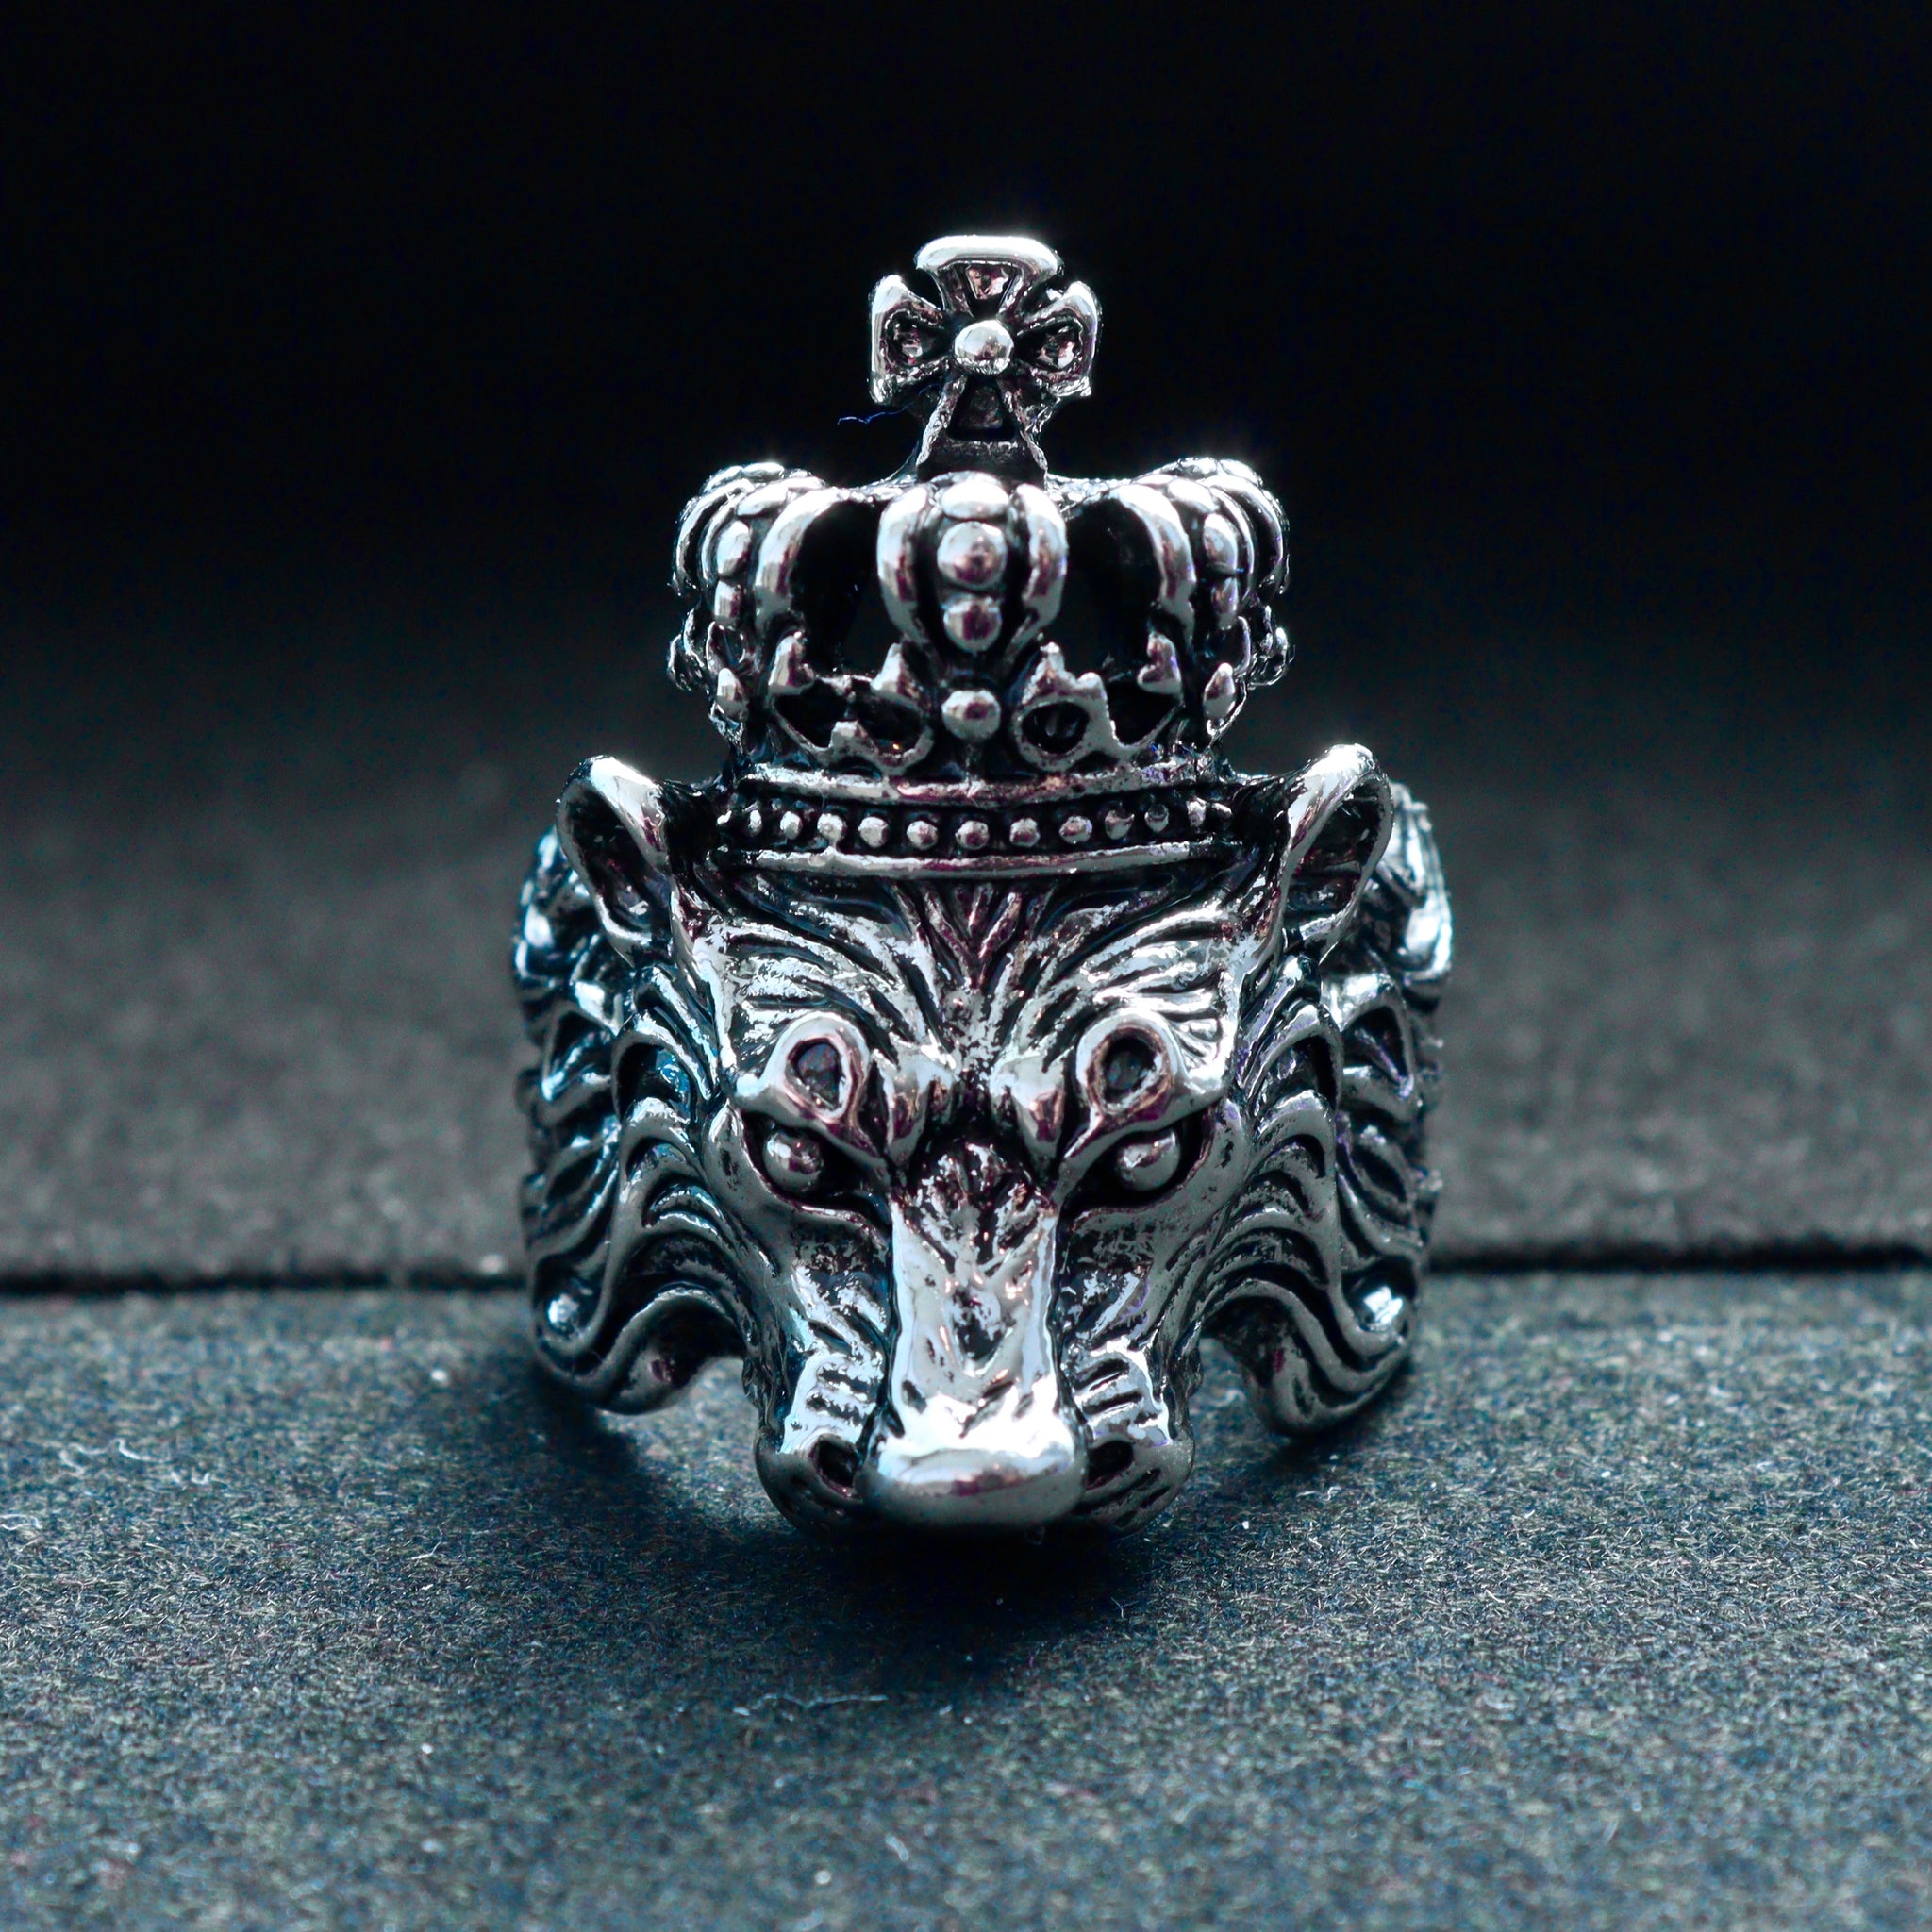 Vintage Gold Lion Ring Stainless Steel Lion Head Rings US Size 7 8 9 10 11  12 13 From Amleso, $8.71 | DHgate.Com